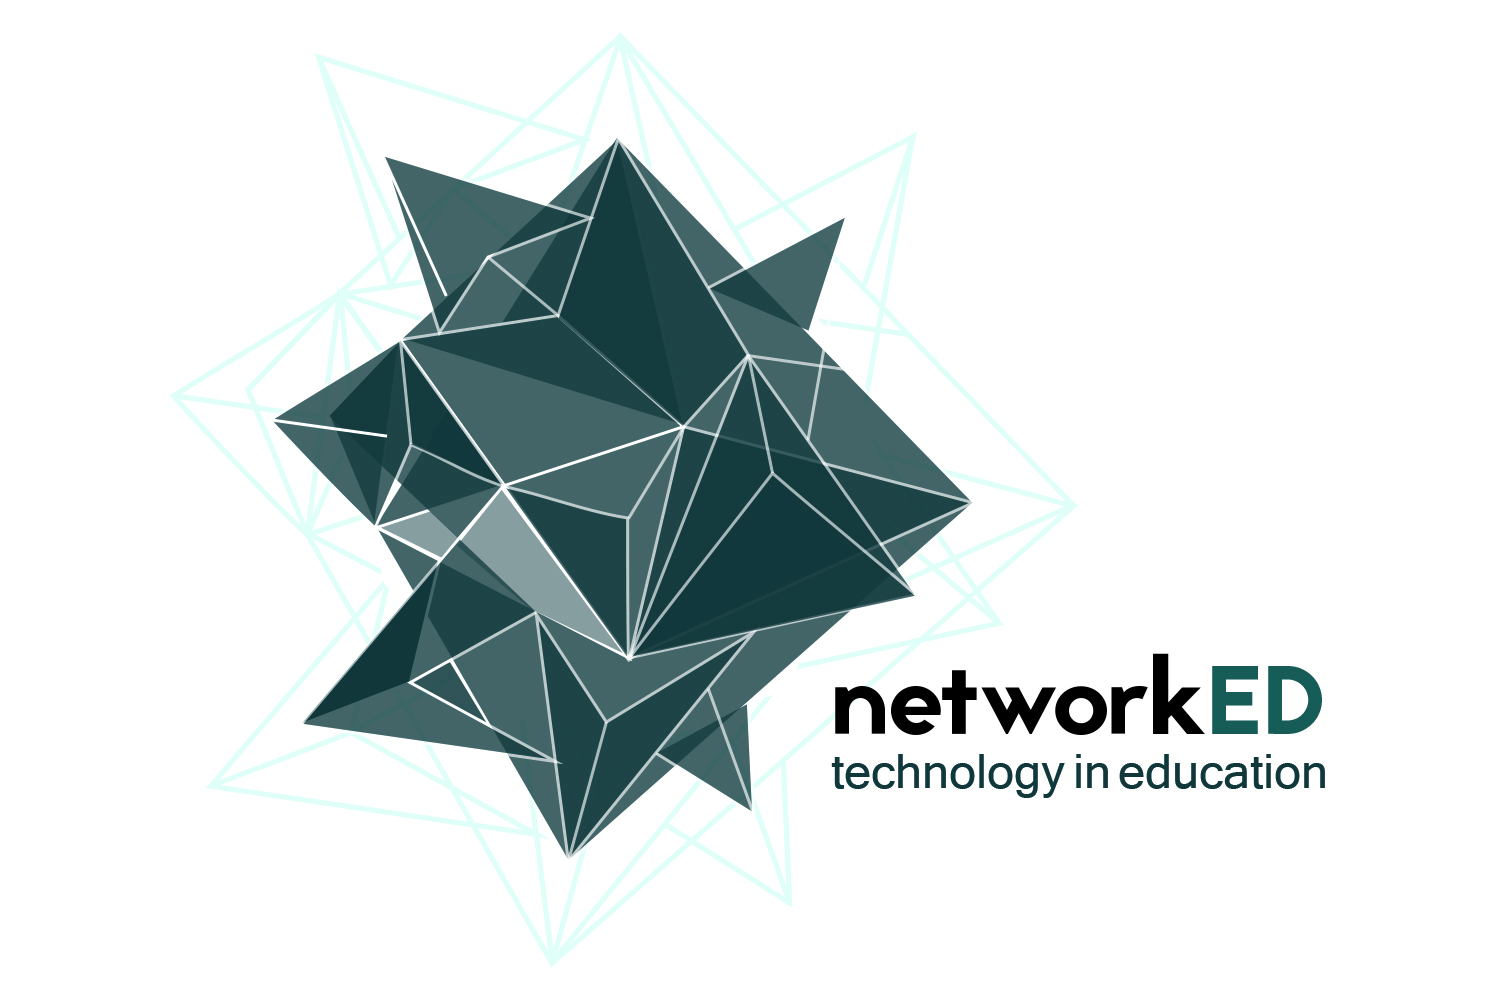 NetworkED - James Clay - 9th March 2016